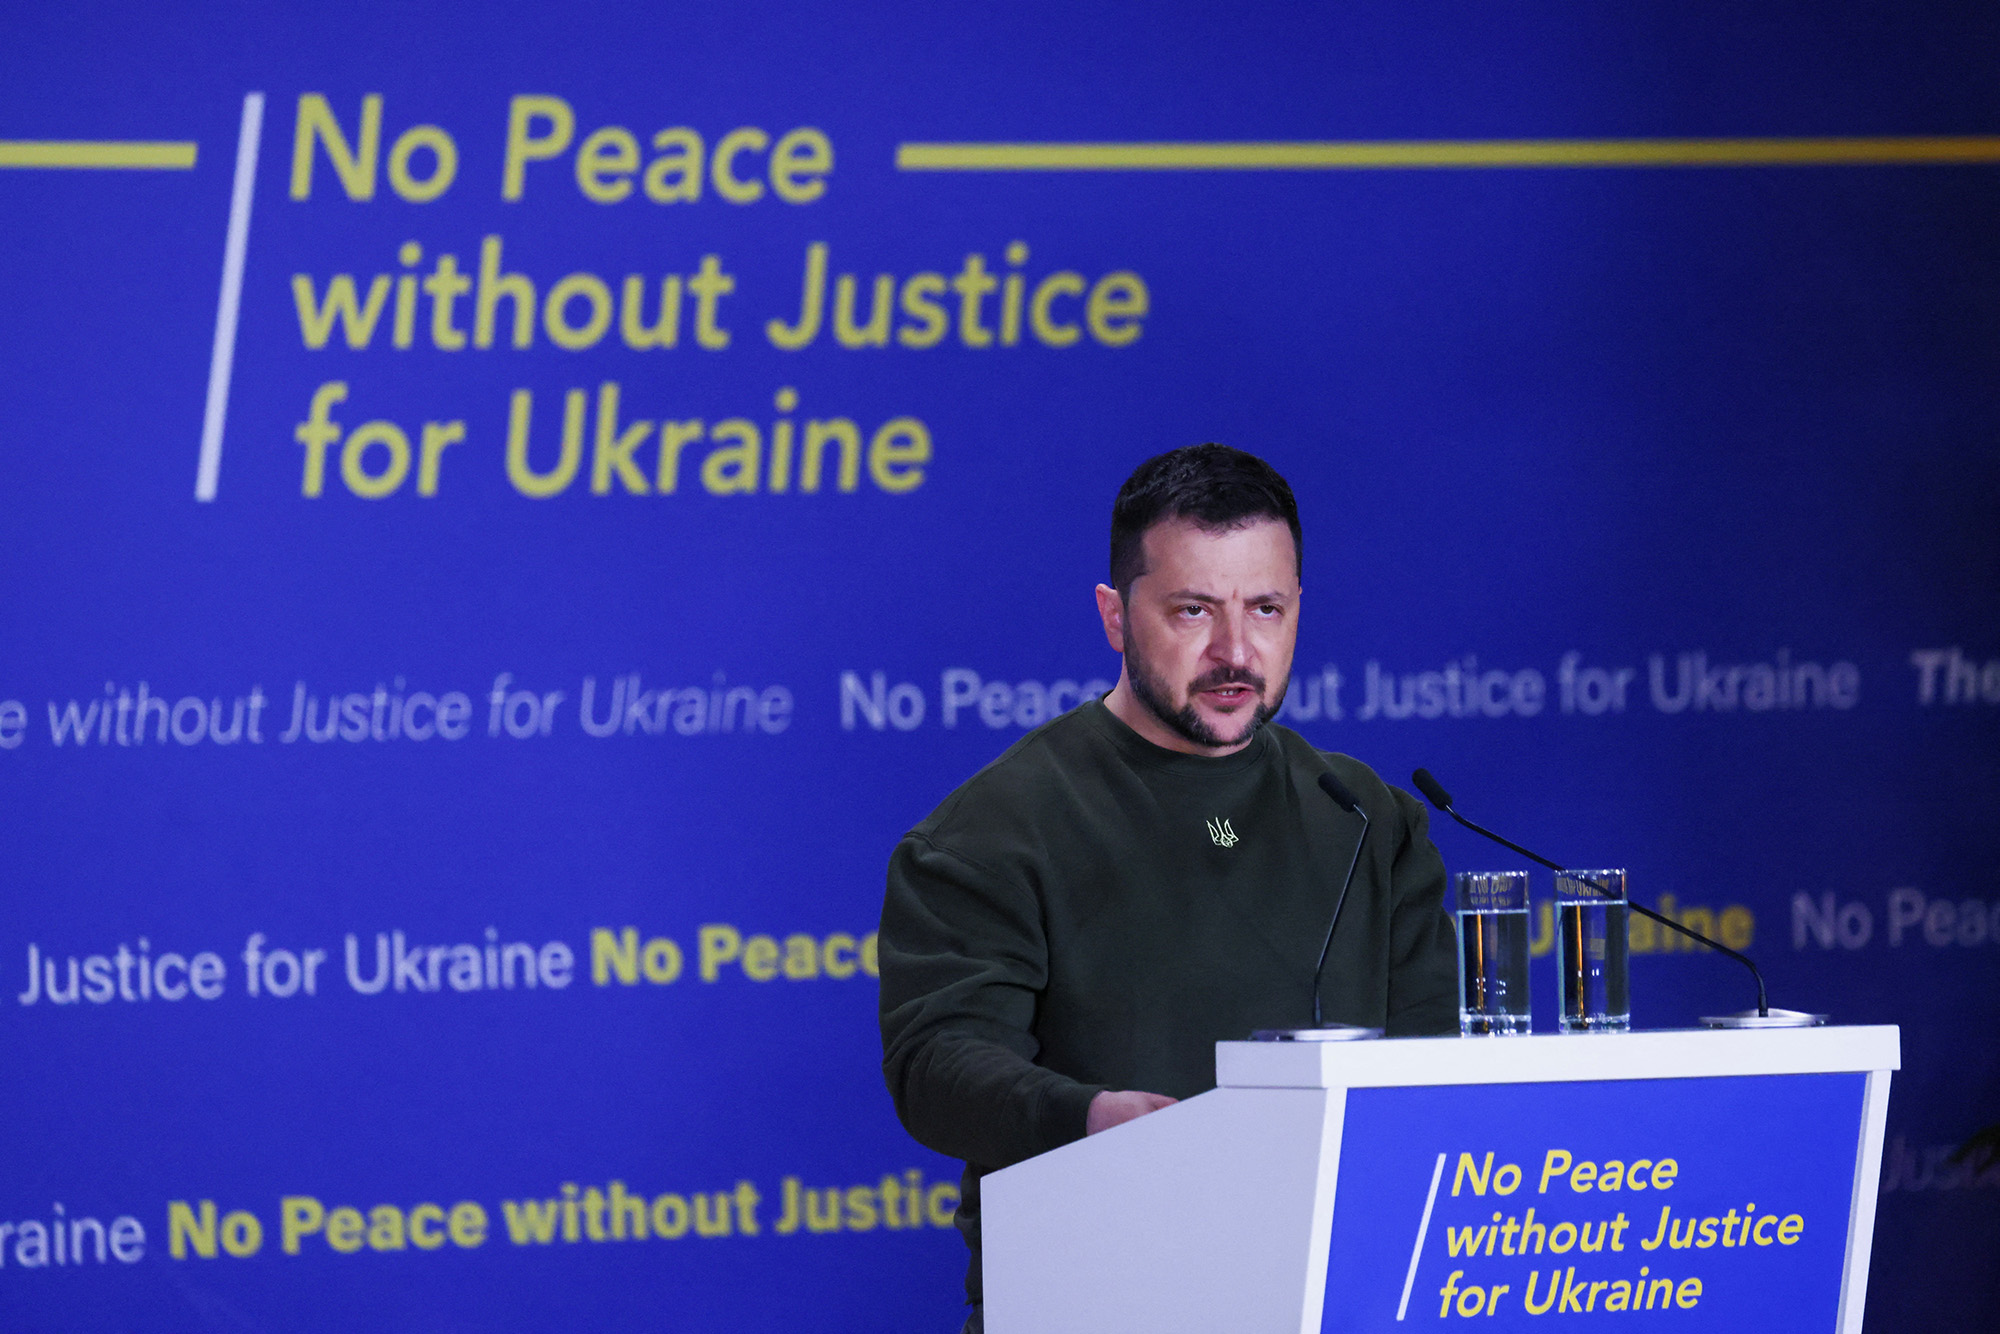 Ukraine's President Volodymyr Zelensky delivers a speech titled "No Peace Without Justice for Ukraine", in the Hague, Netherlands, on May 4.